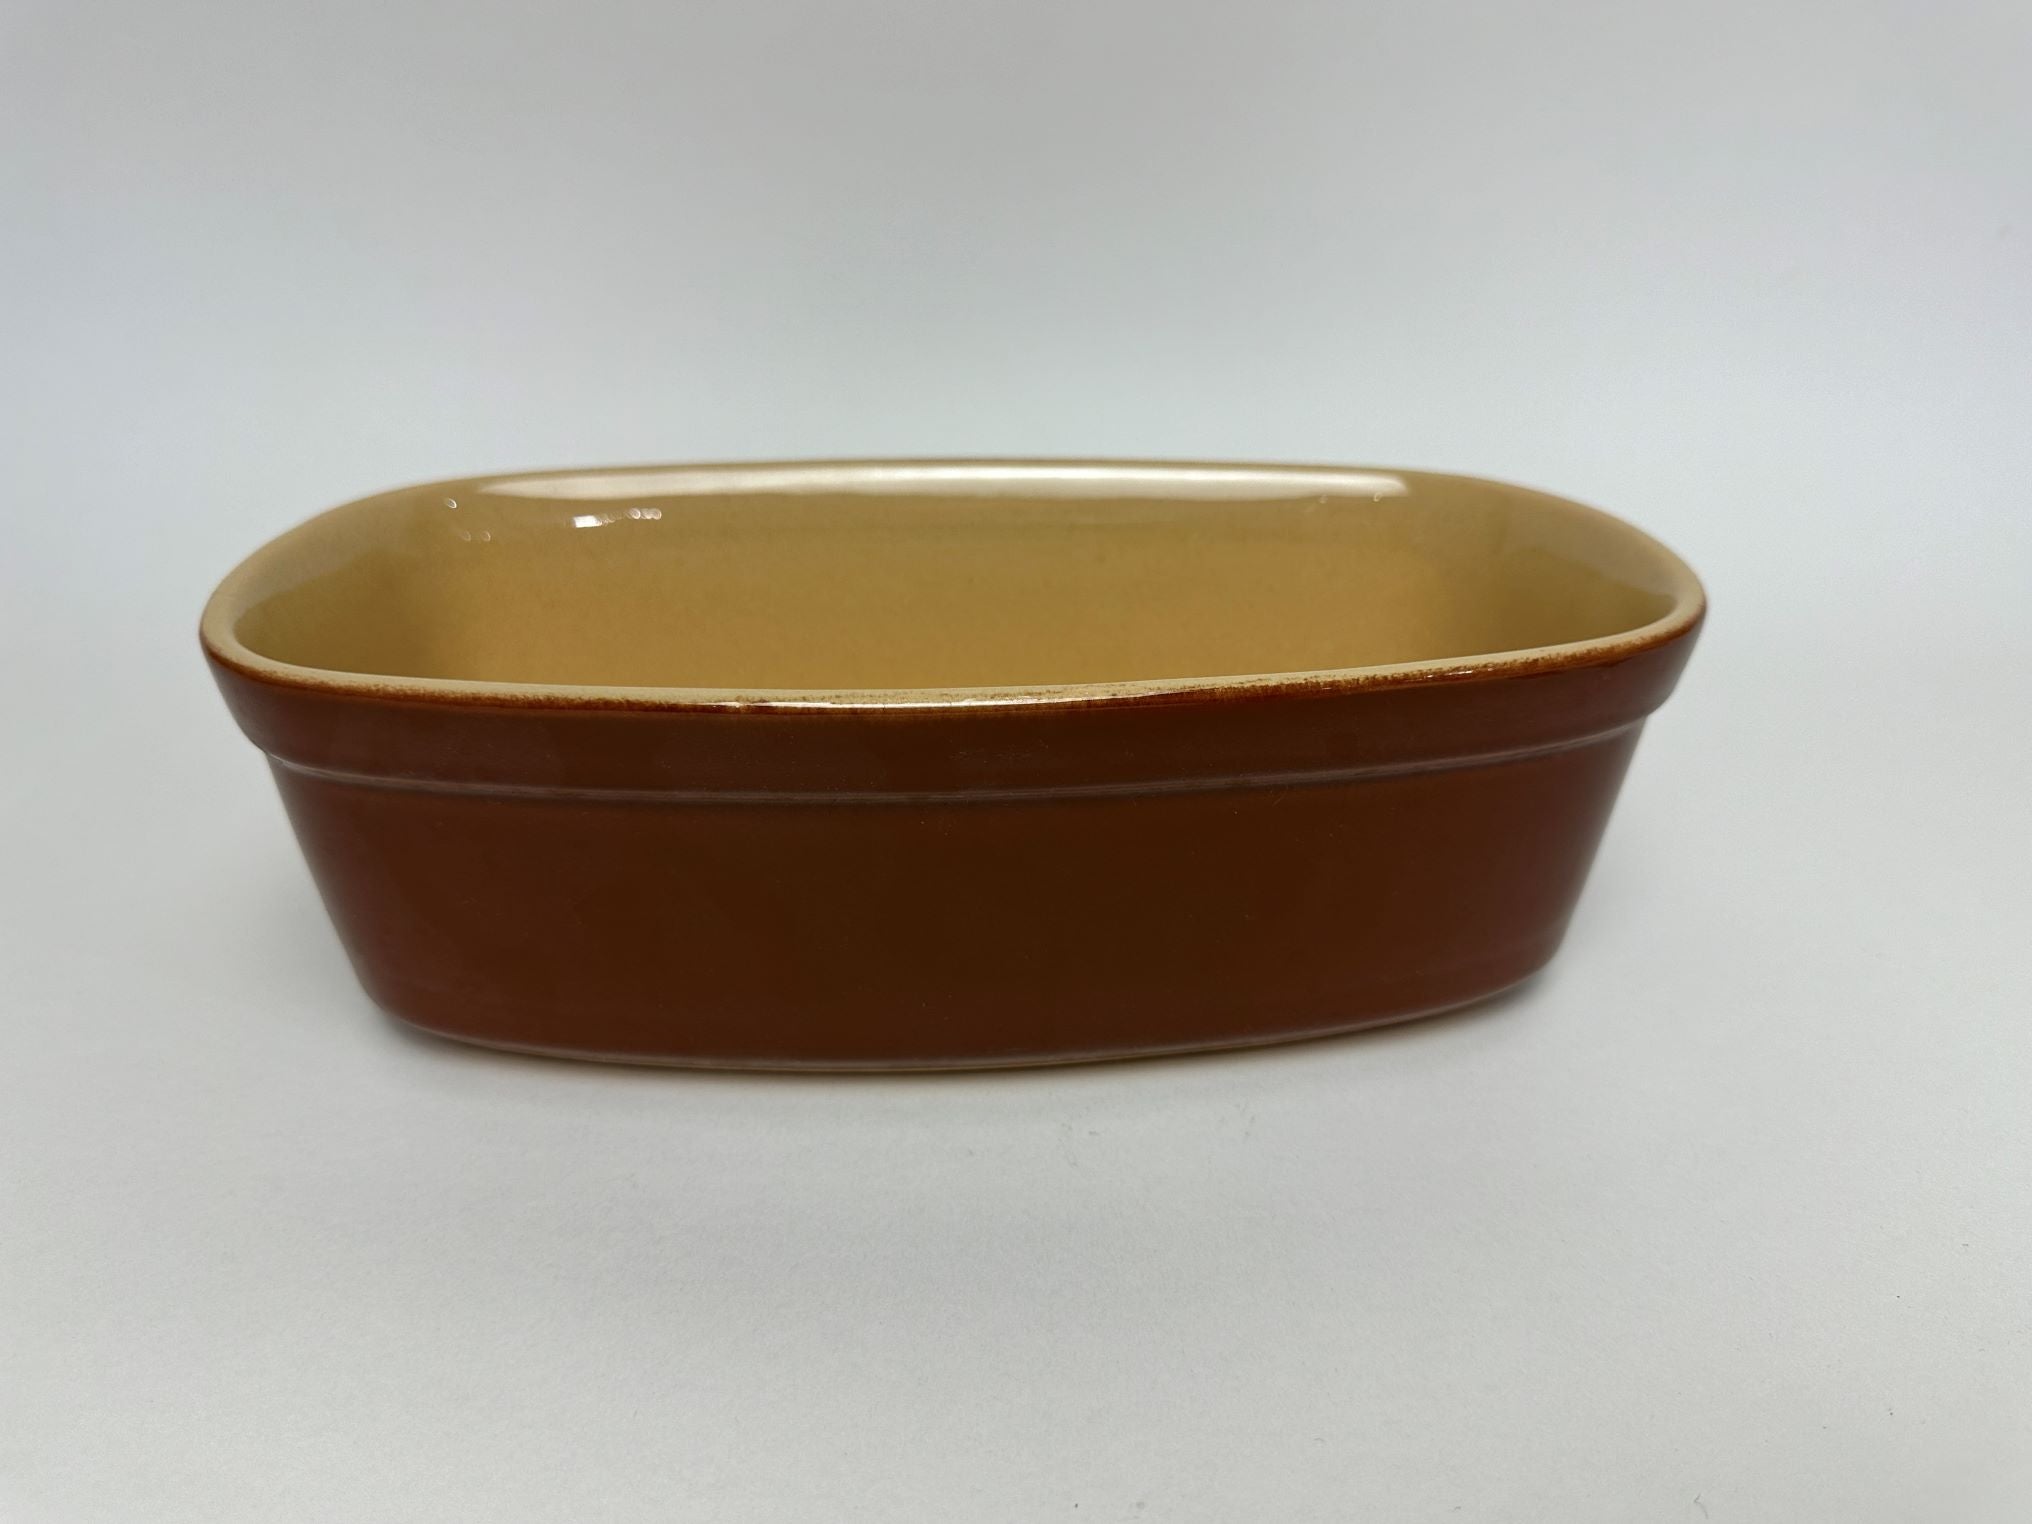 Rectangular Vintage French terrine baking dish in brown ceramic with a cream color interior.